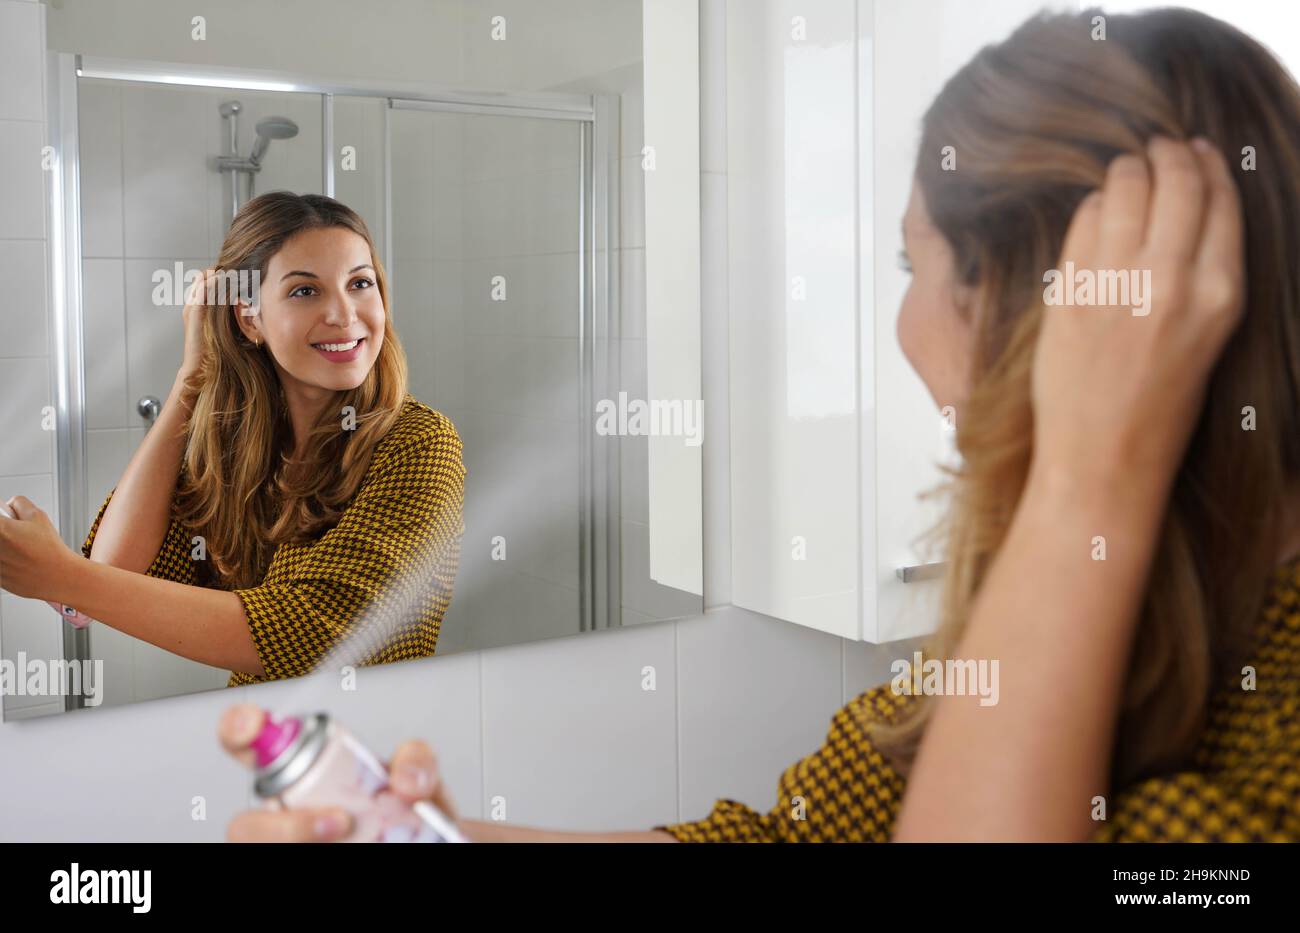 Young woman applying dry shampoo on her hair before going out. Fast and easy way to covering grey hair with instant spray dye. Stock Photo